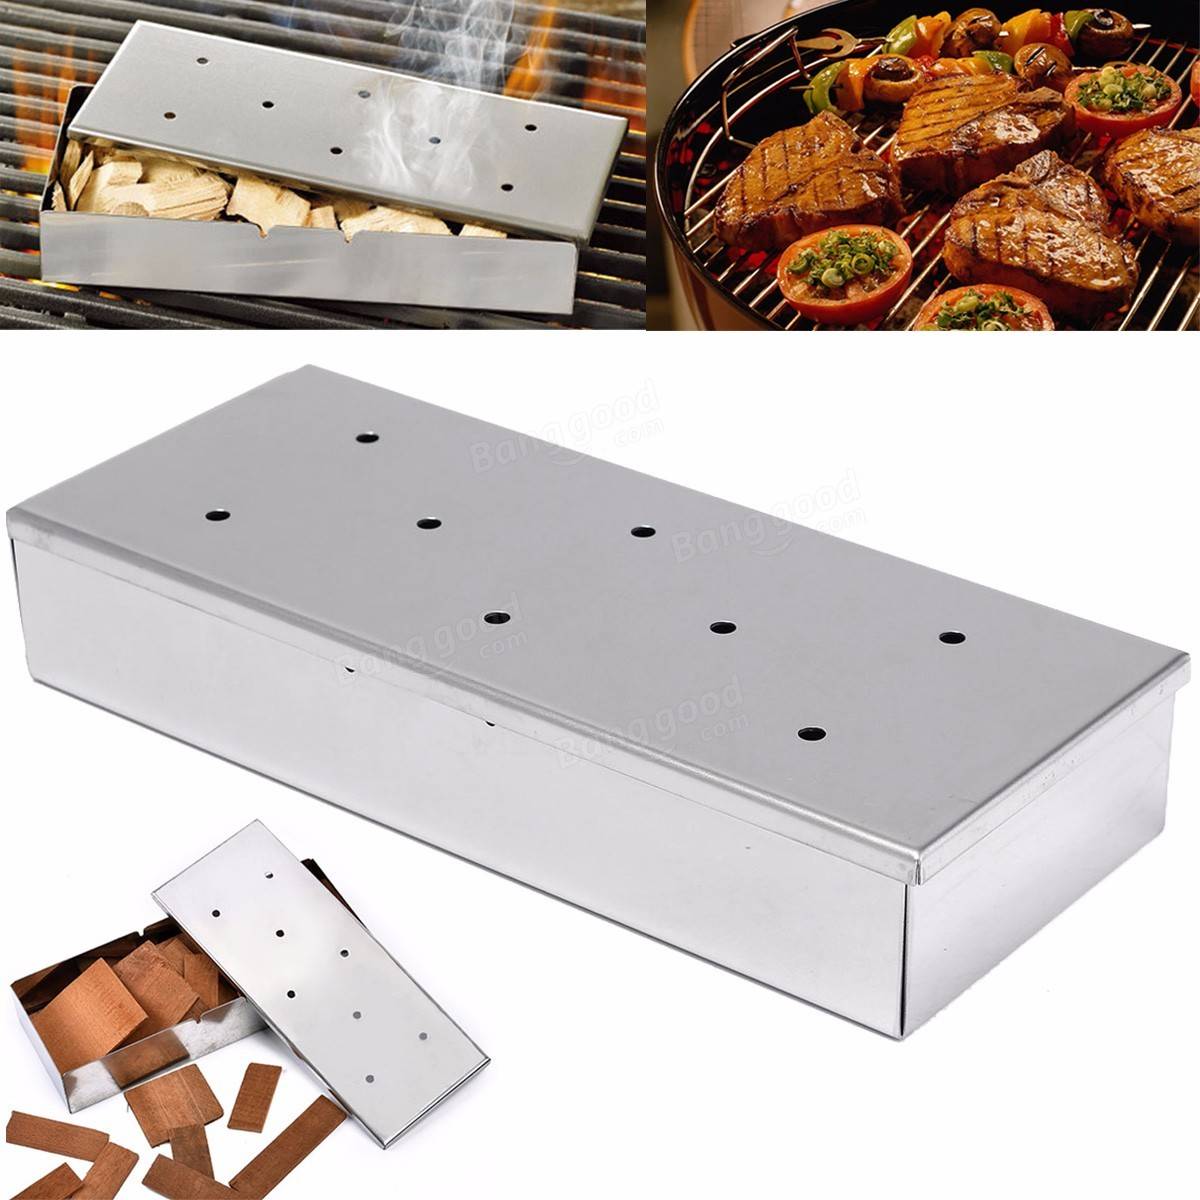 Stainless Steel BBQ Gas Grill Smoker Box Home Garden Outdoor Wood Chips ...